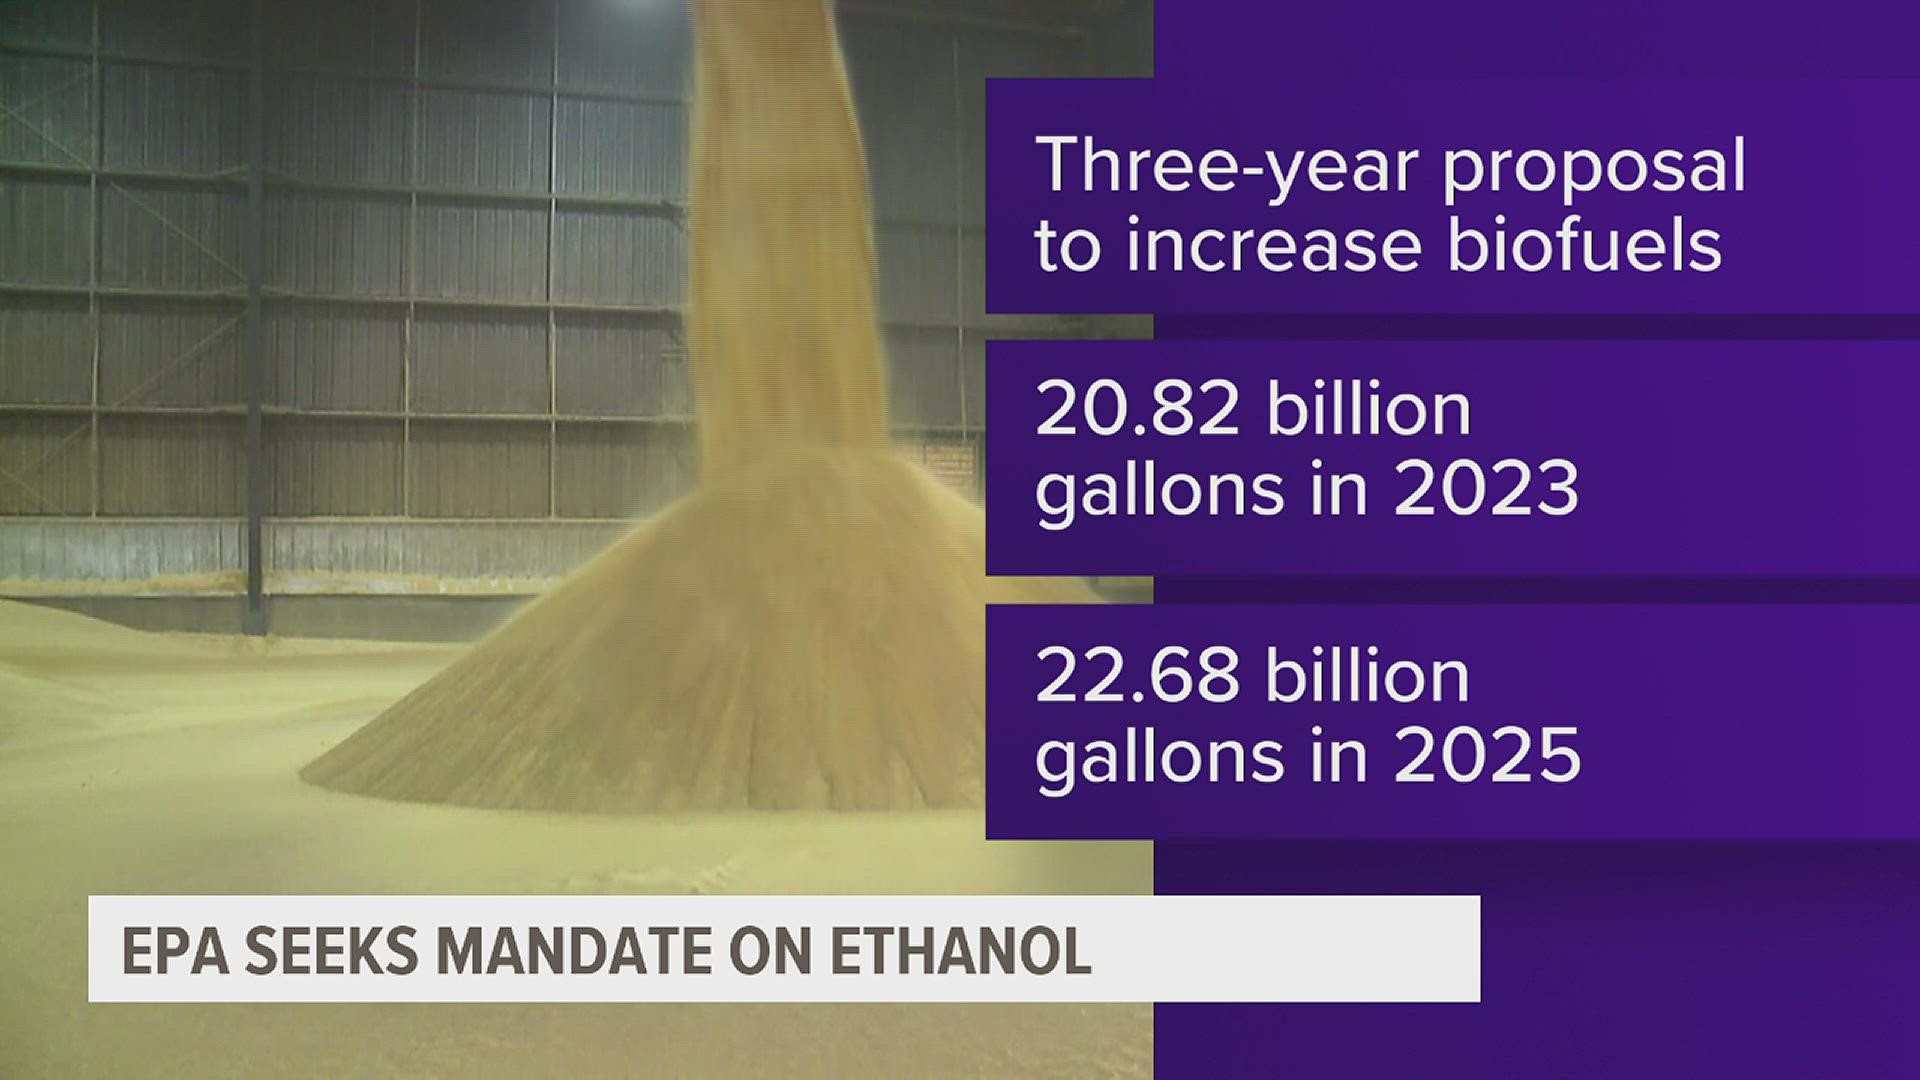 The federal agency has proposed using nearly 21 billion gallons of renewable fuel in 2023, and even more by 2025.